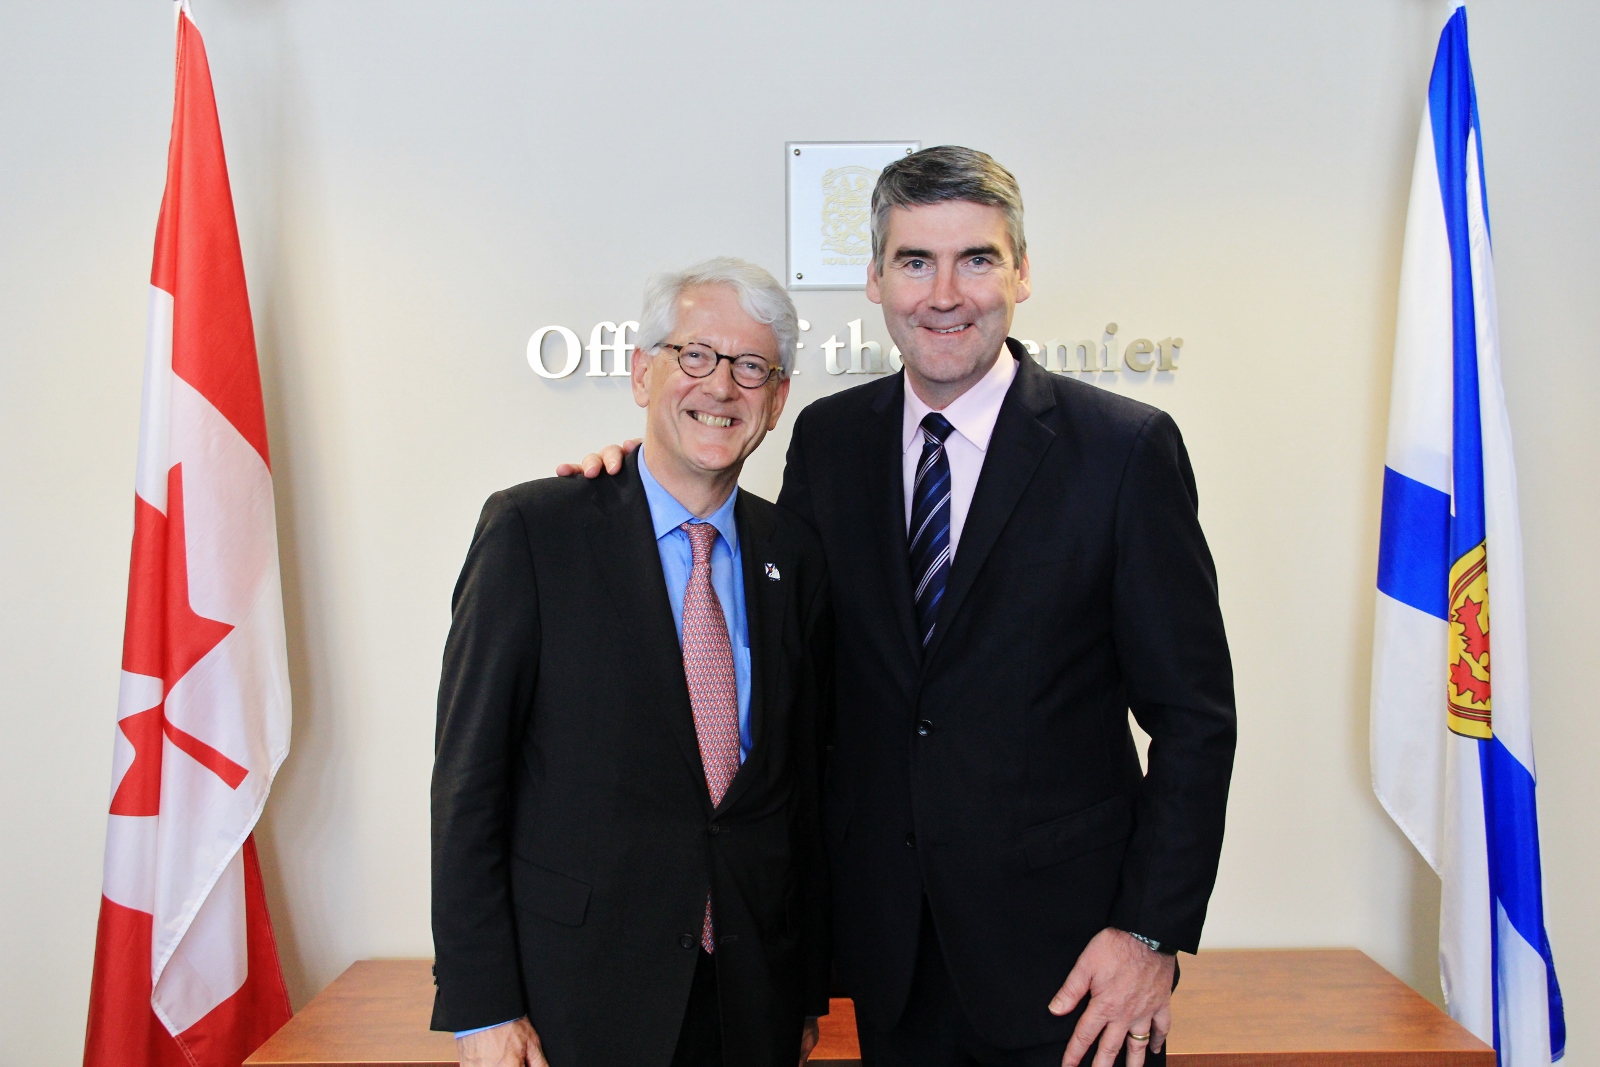 Premier McNeil met with His Excellency Cornelis Kole, Ambassador of the Kingdom of the Netherlands to Canada